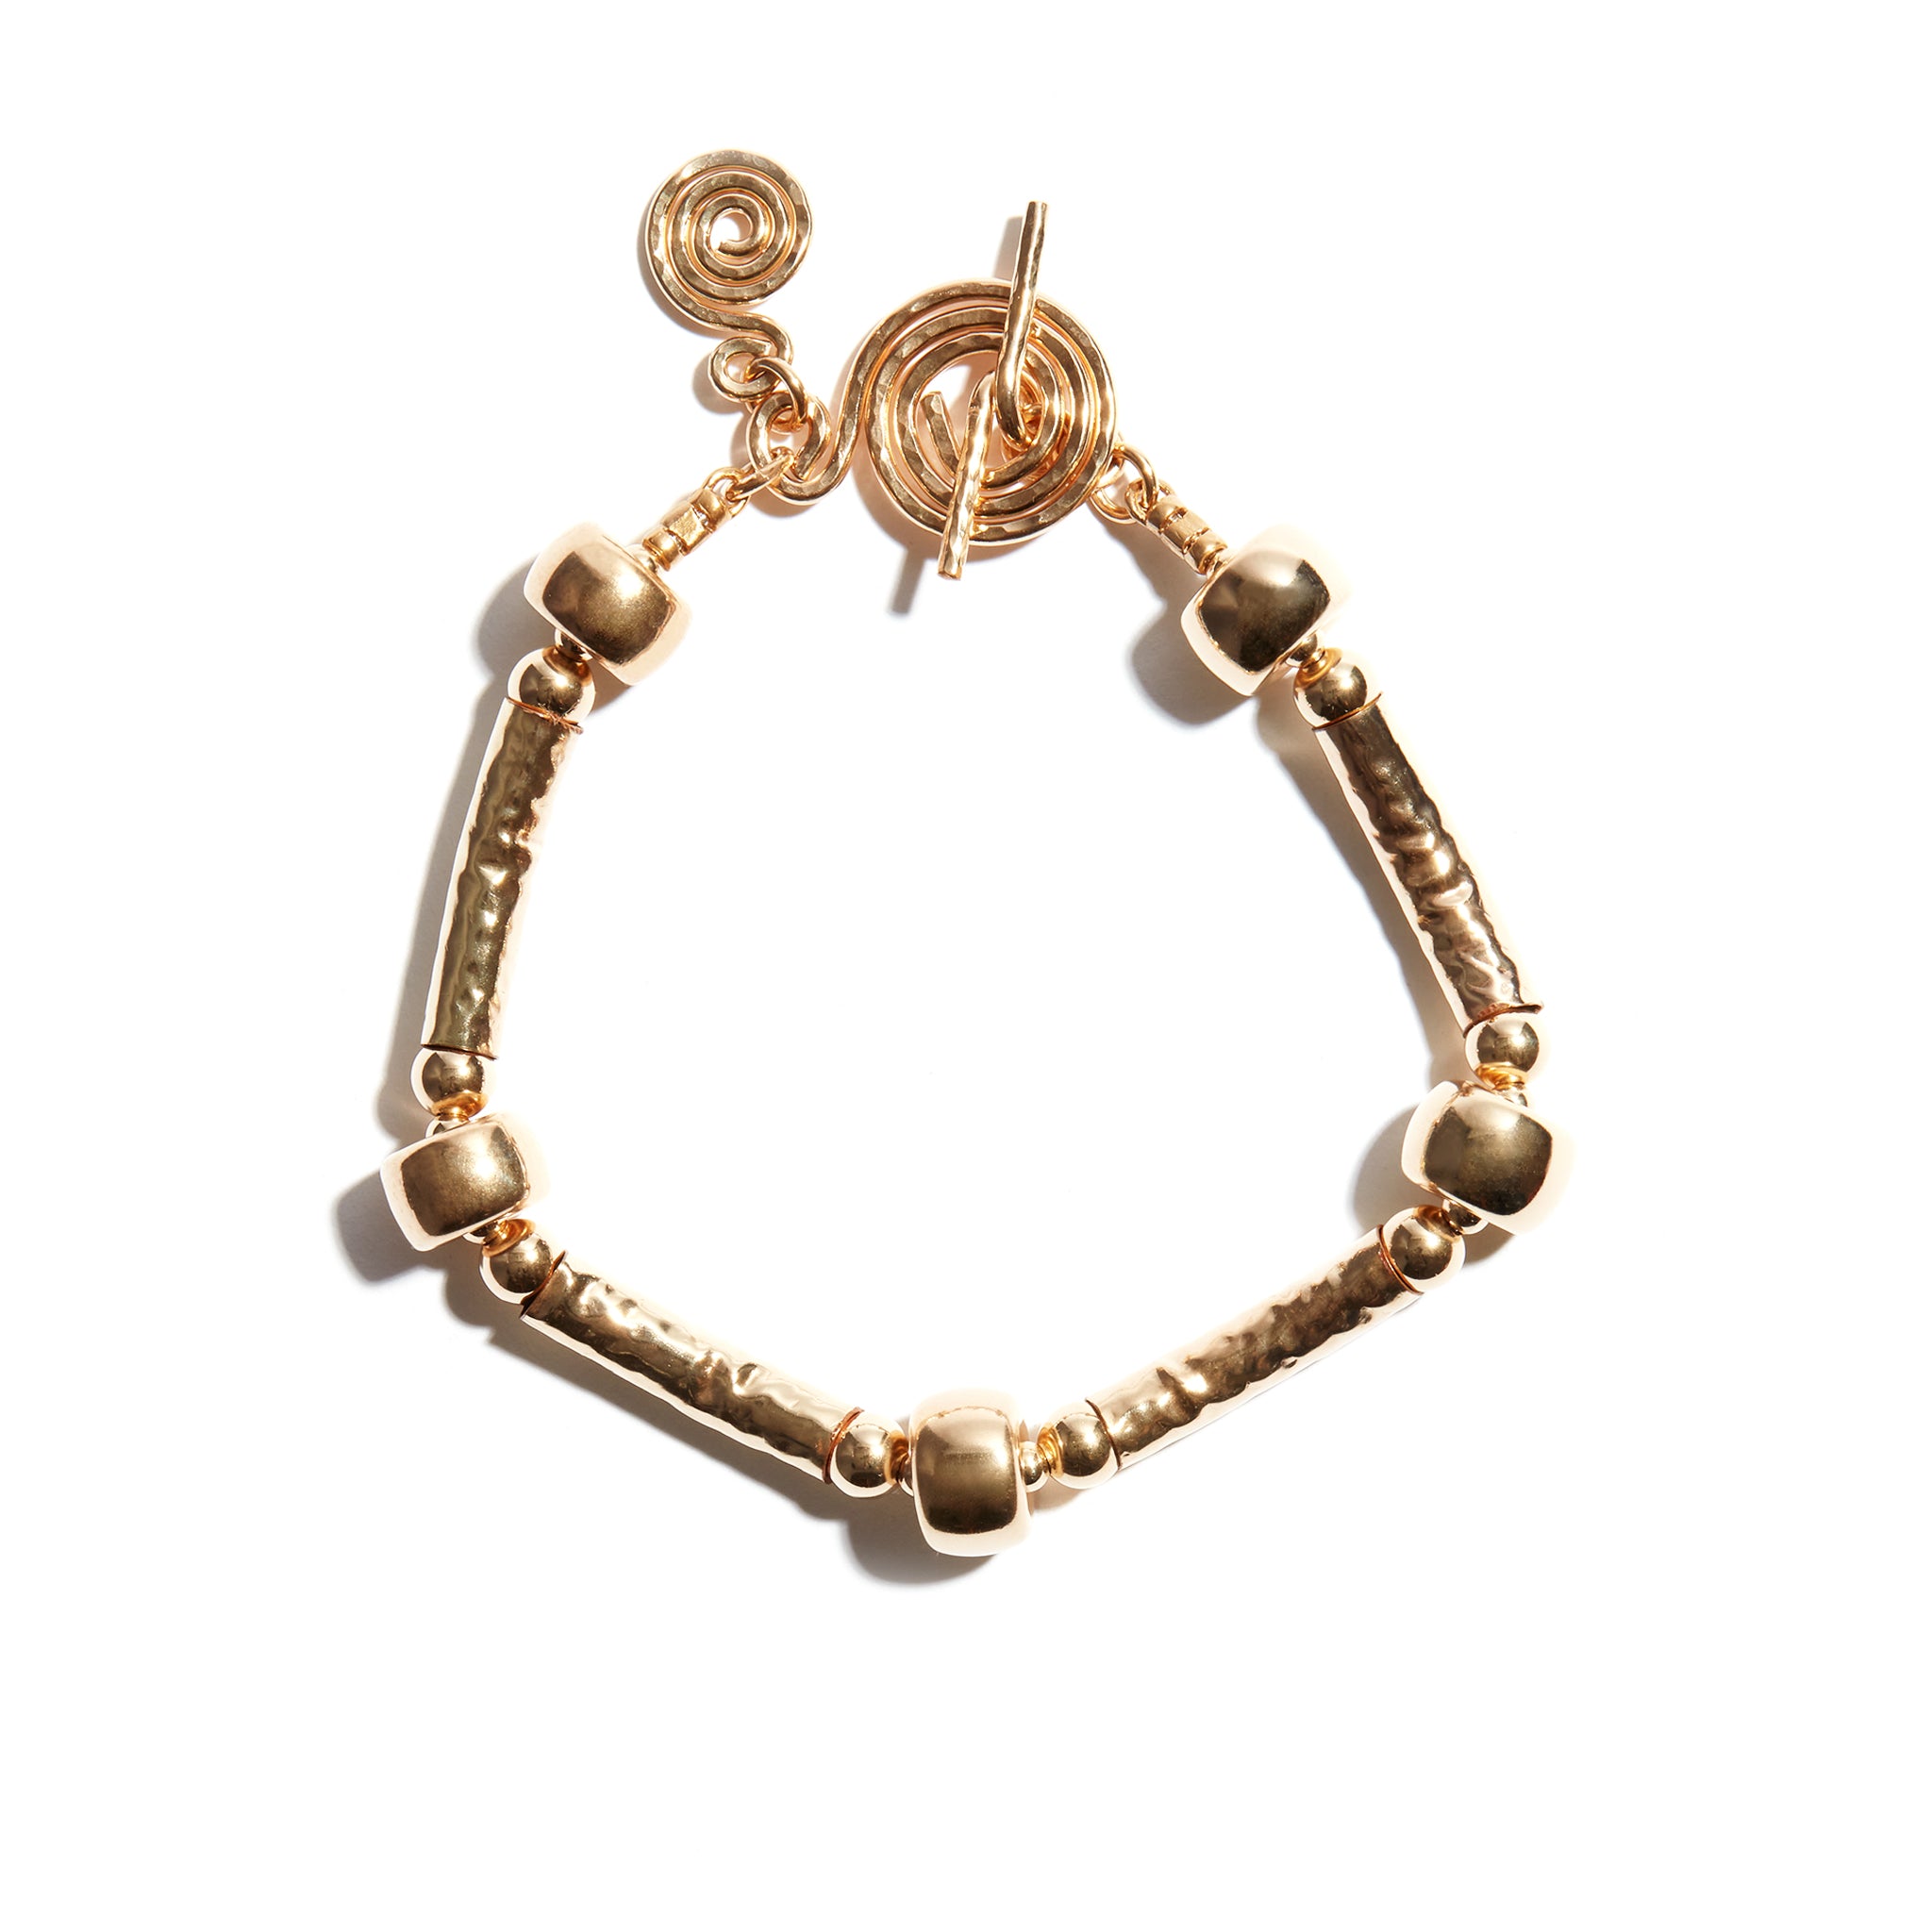 Our Celtic T-Bar Tube Bracelet is made up of textured tube beads, complete with a unique Seoidín Celtic spiral T-bar clasp. A much loved feature of many Seoidín designs, the Celtic spiral pays homage to Ireland, our infinite inspiration.